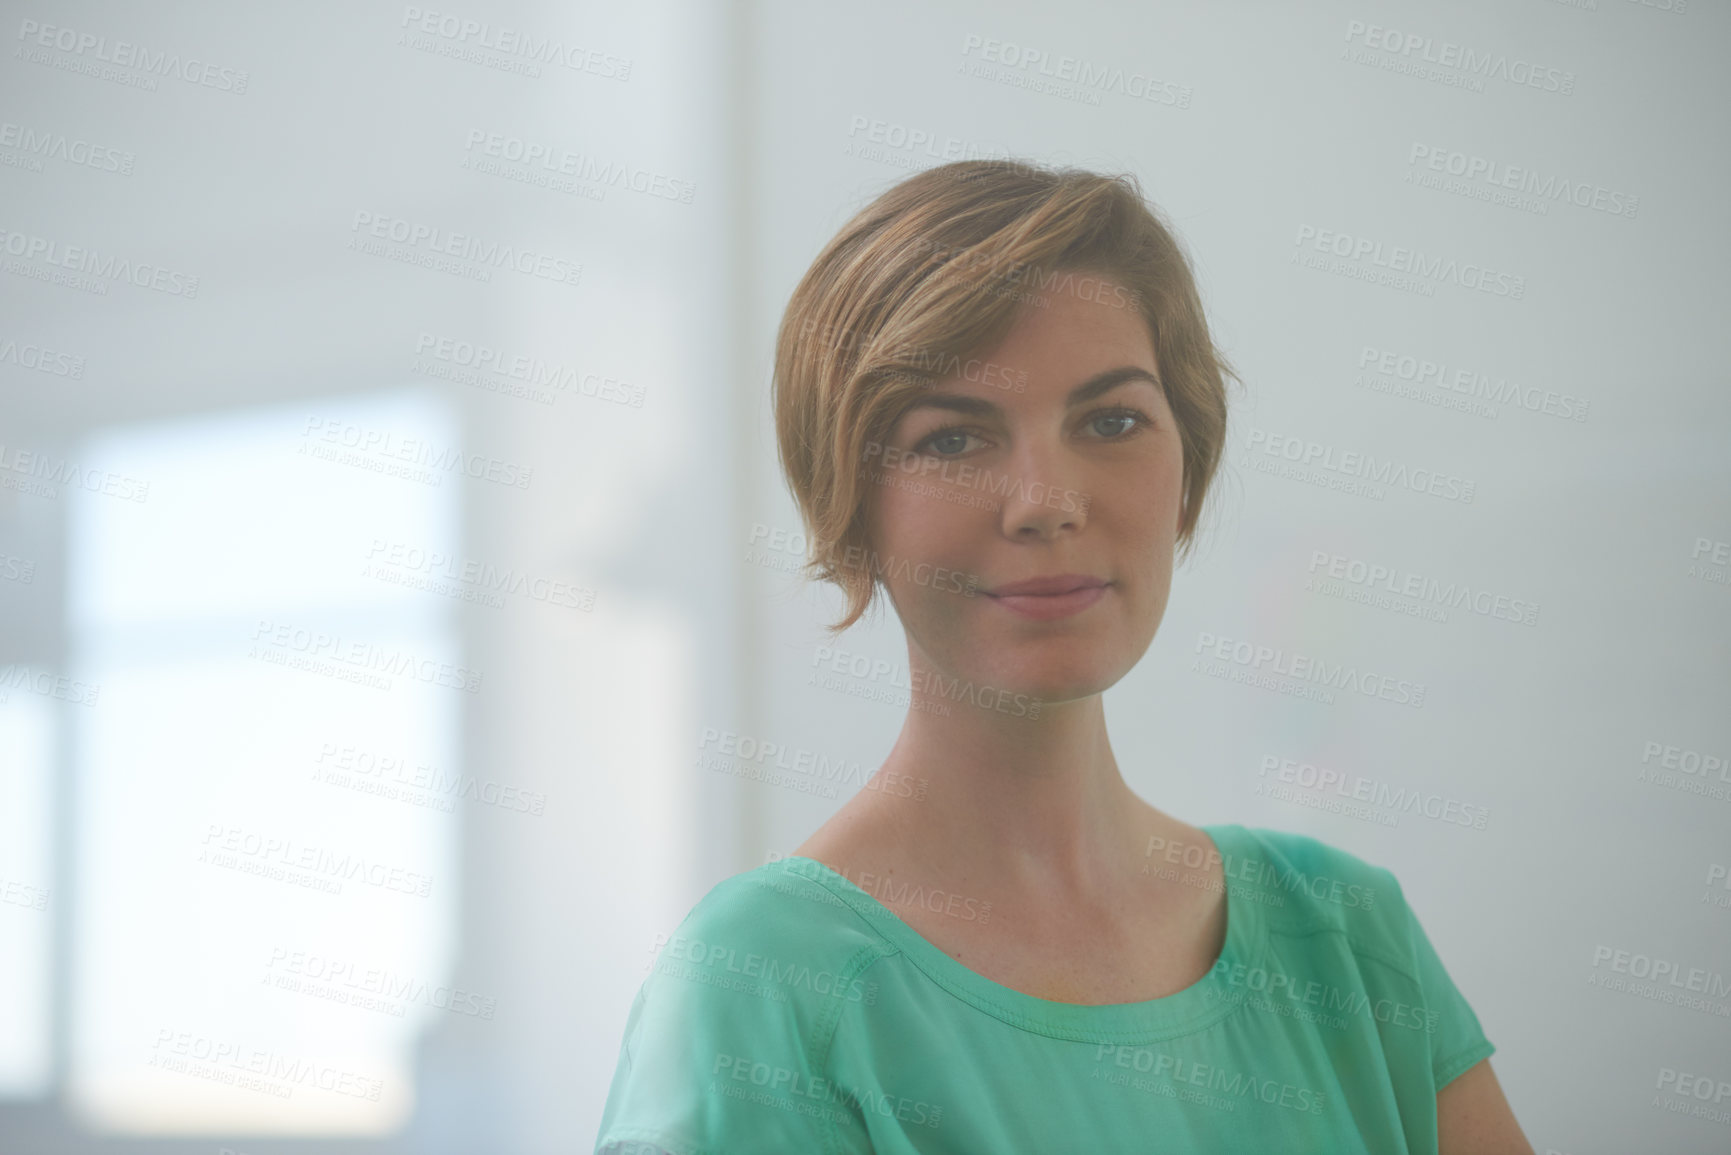 Buy stock photo Shot of an attractive designer standing in a large office